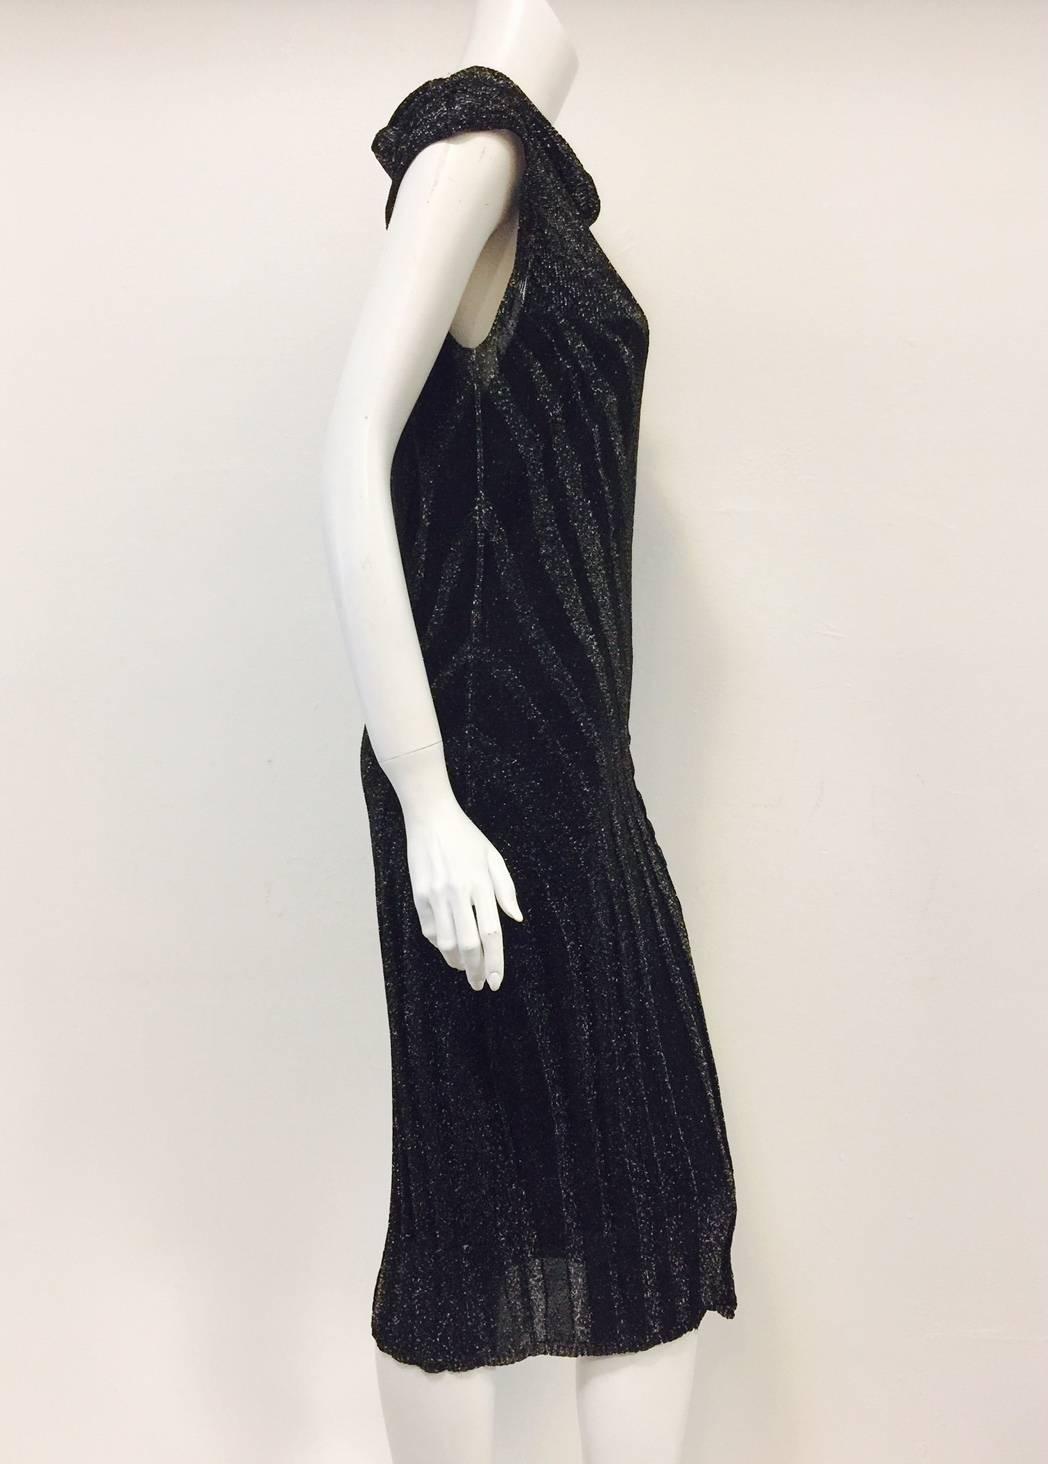 New Escada Black and Gold Metallic Knit Cap Sleeve Dress With Cowl Neck 1